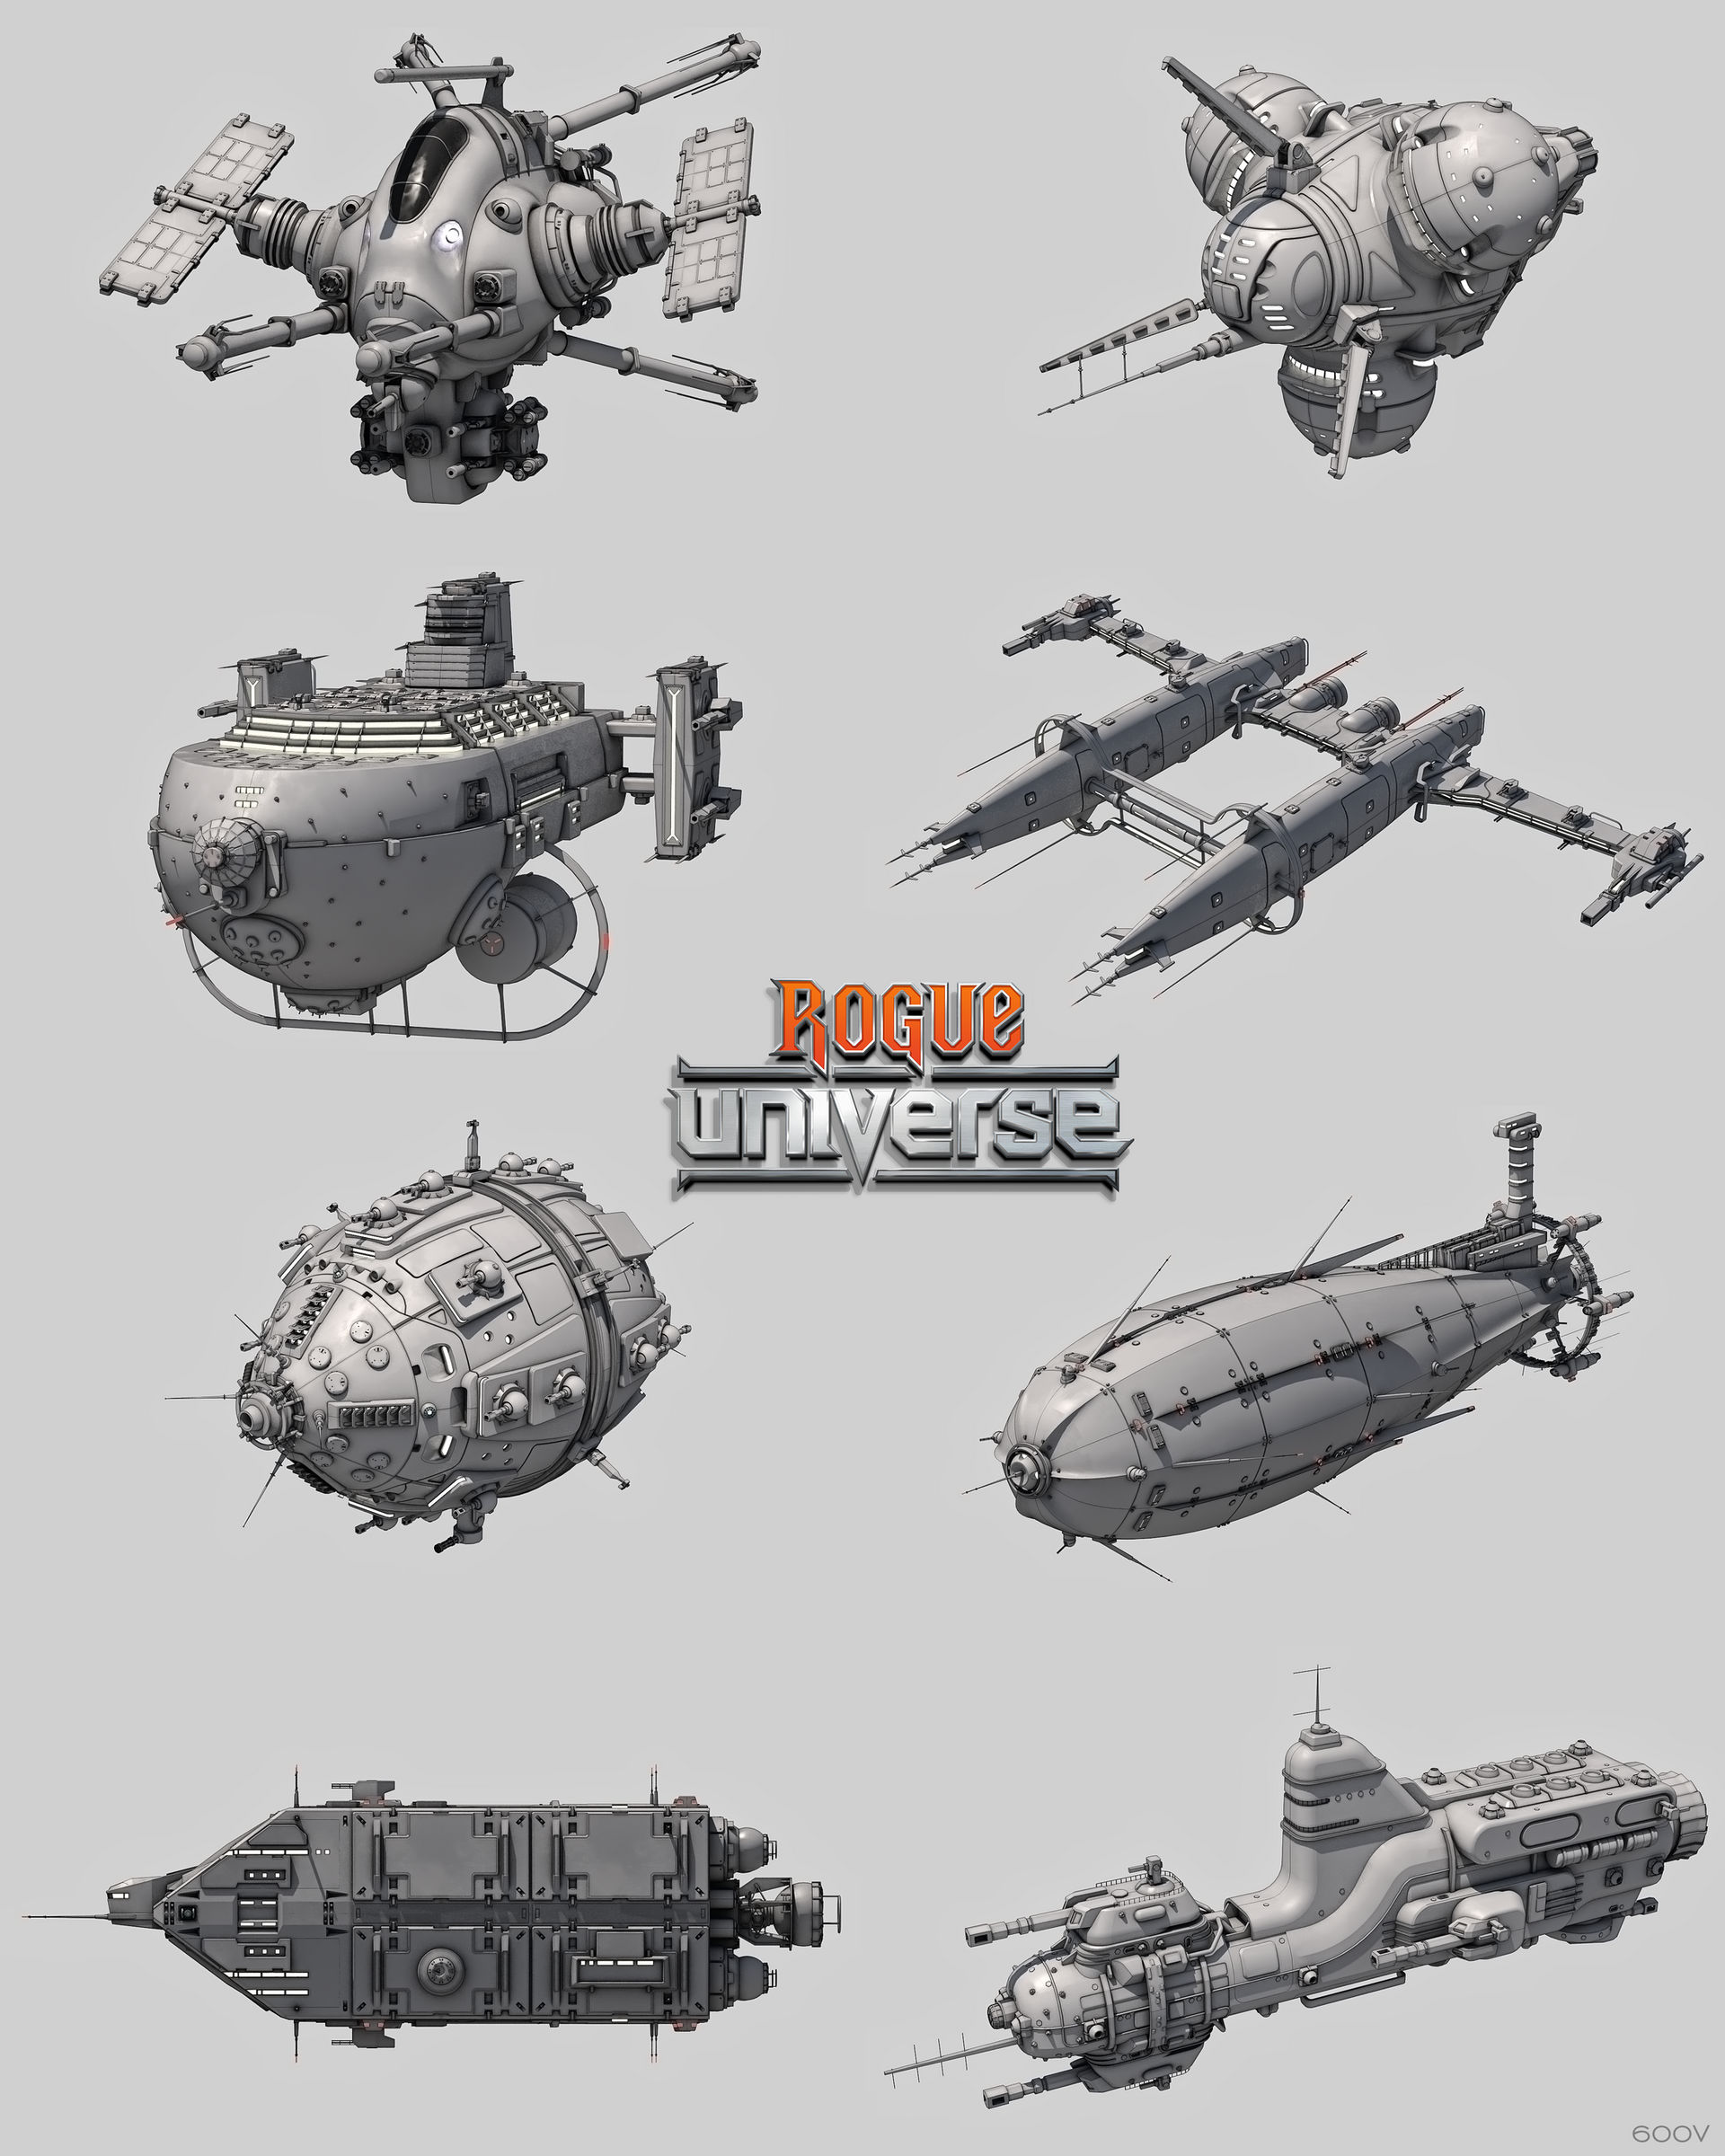 [ SKETCHUP objets ] IXLRLXI - 600v - Rust Shake même combats! :) Spaceships___rogue_universe__must_games__by_600v_dcw9sx0-fullview